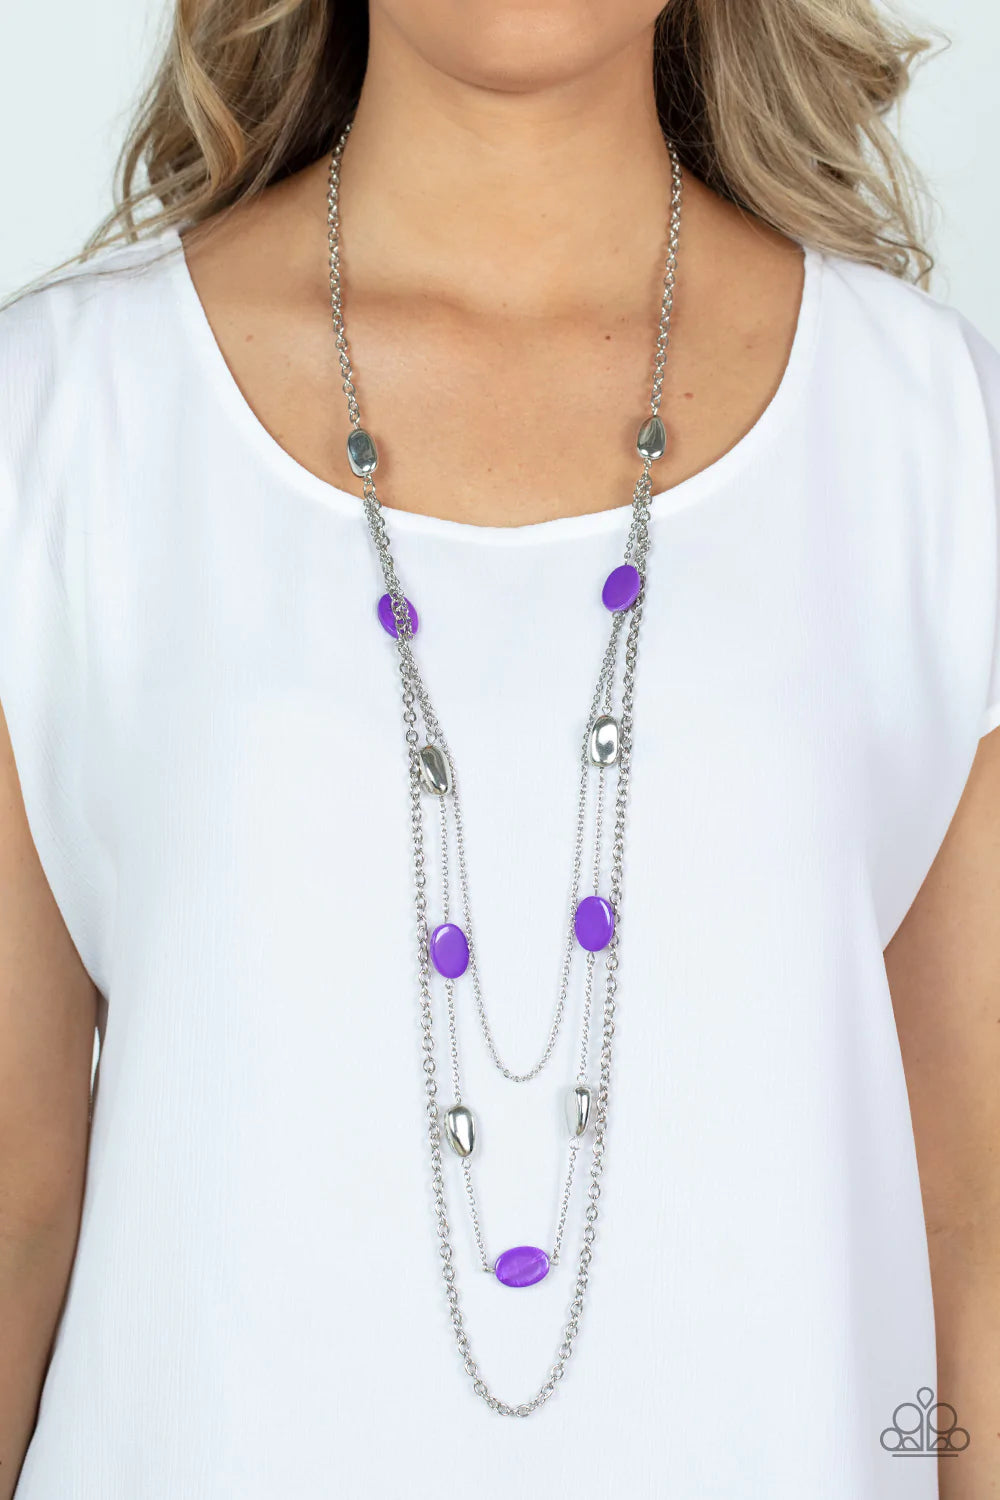 Paparazzi Accessories Barefoot and Beachbound - Purple A strand of silver pebble beads and purple shell-like discs layer with two mismatched silver chain across the chest, adding a seasonal pop of color to any outfit. Features an adjustable clasp closure.